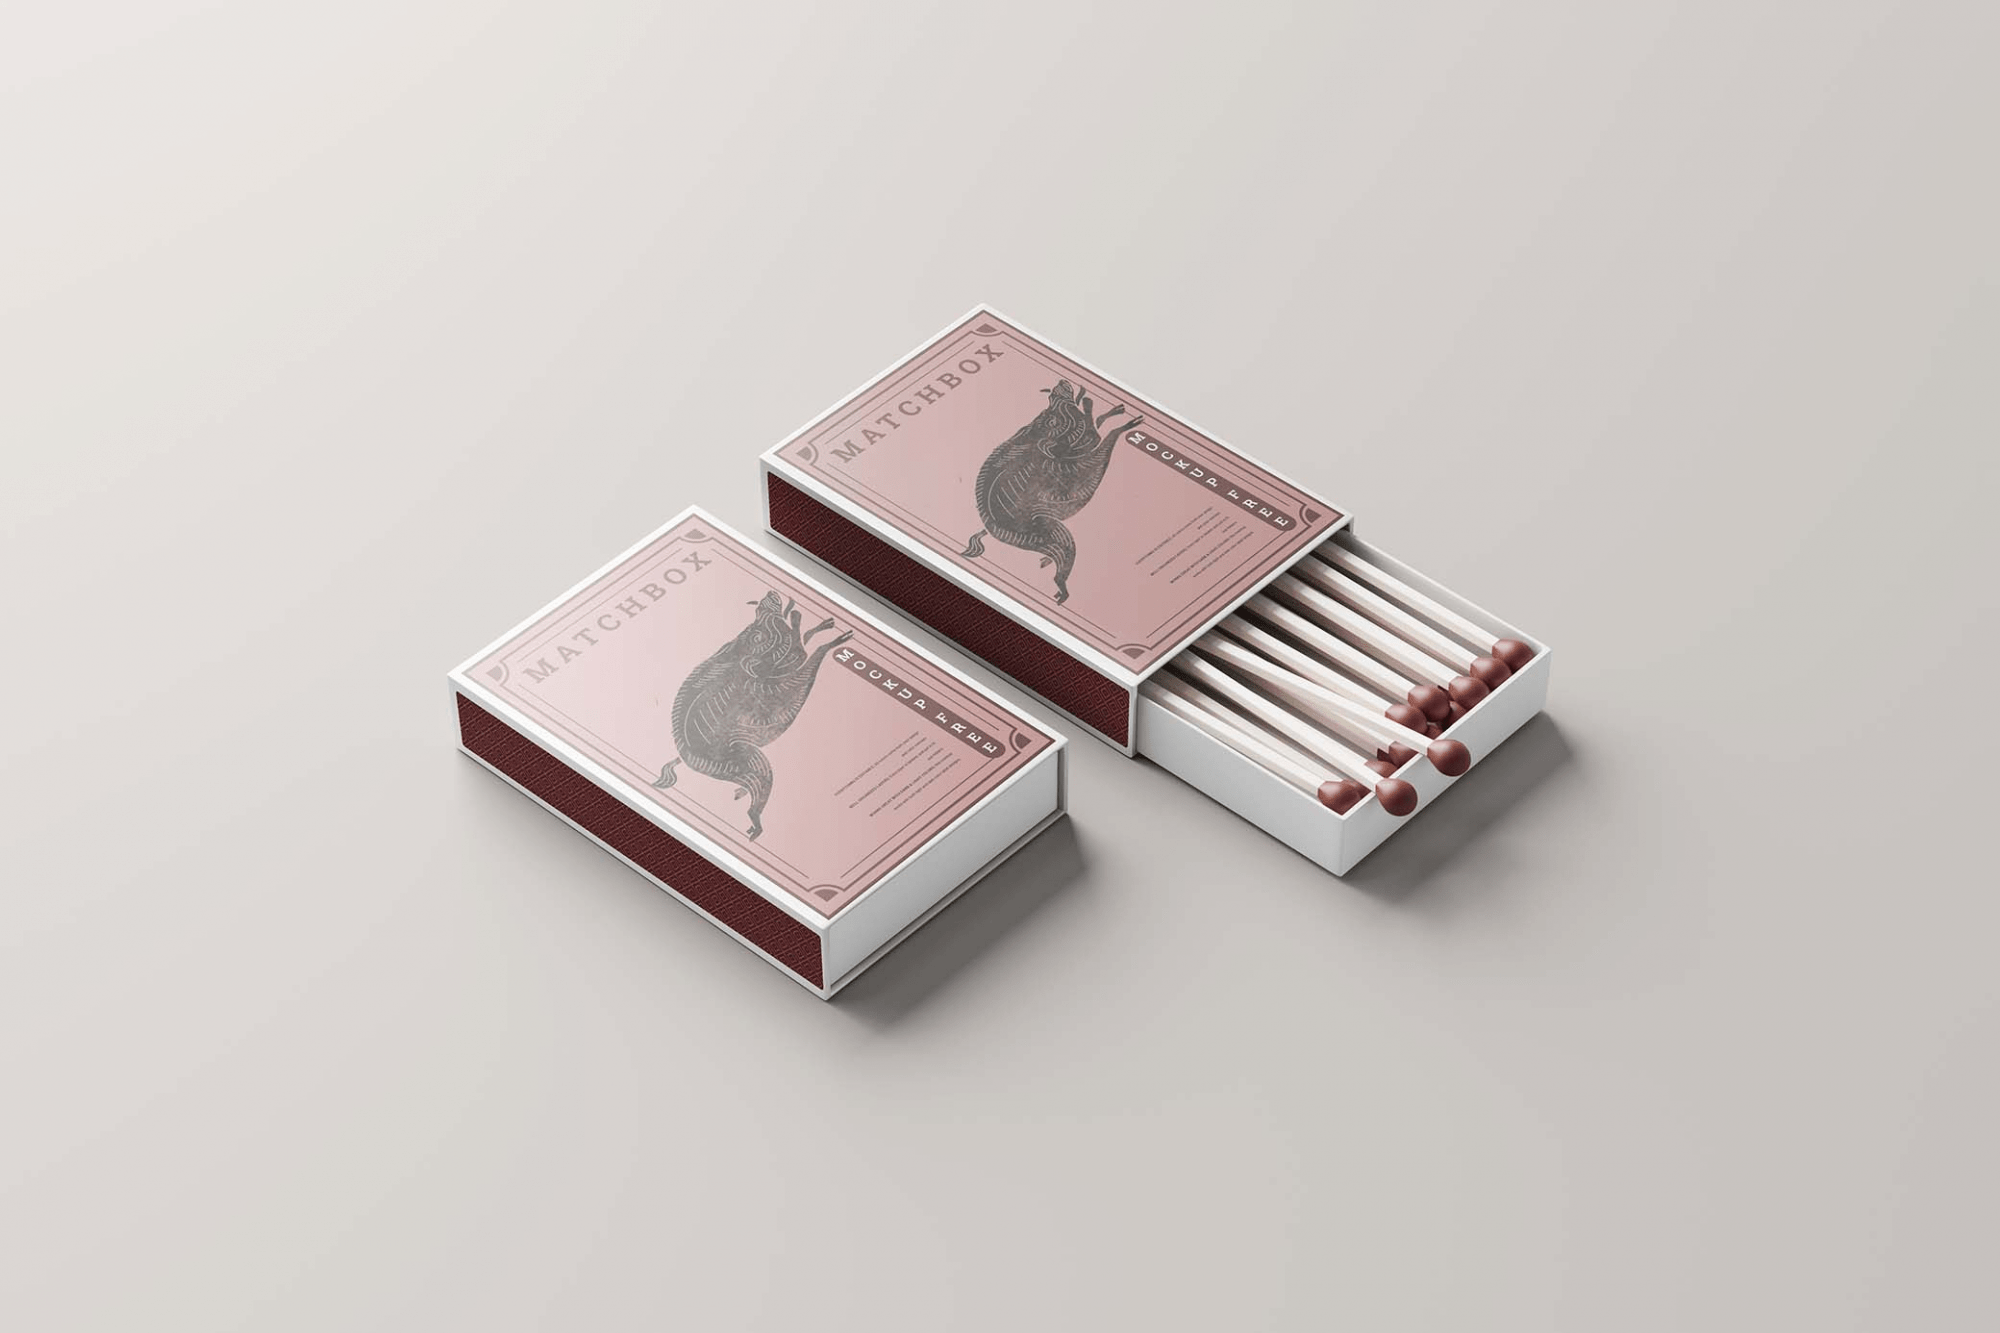 Matchbox mockup featuring two boxes side by side with customizable designs and wooden match colors